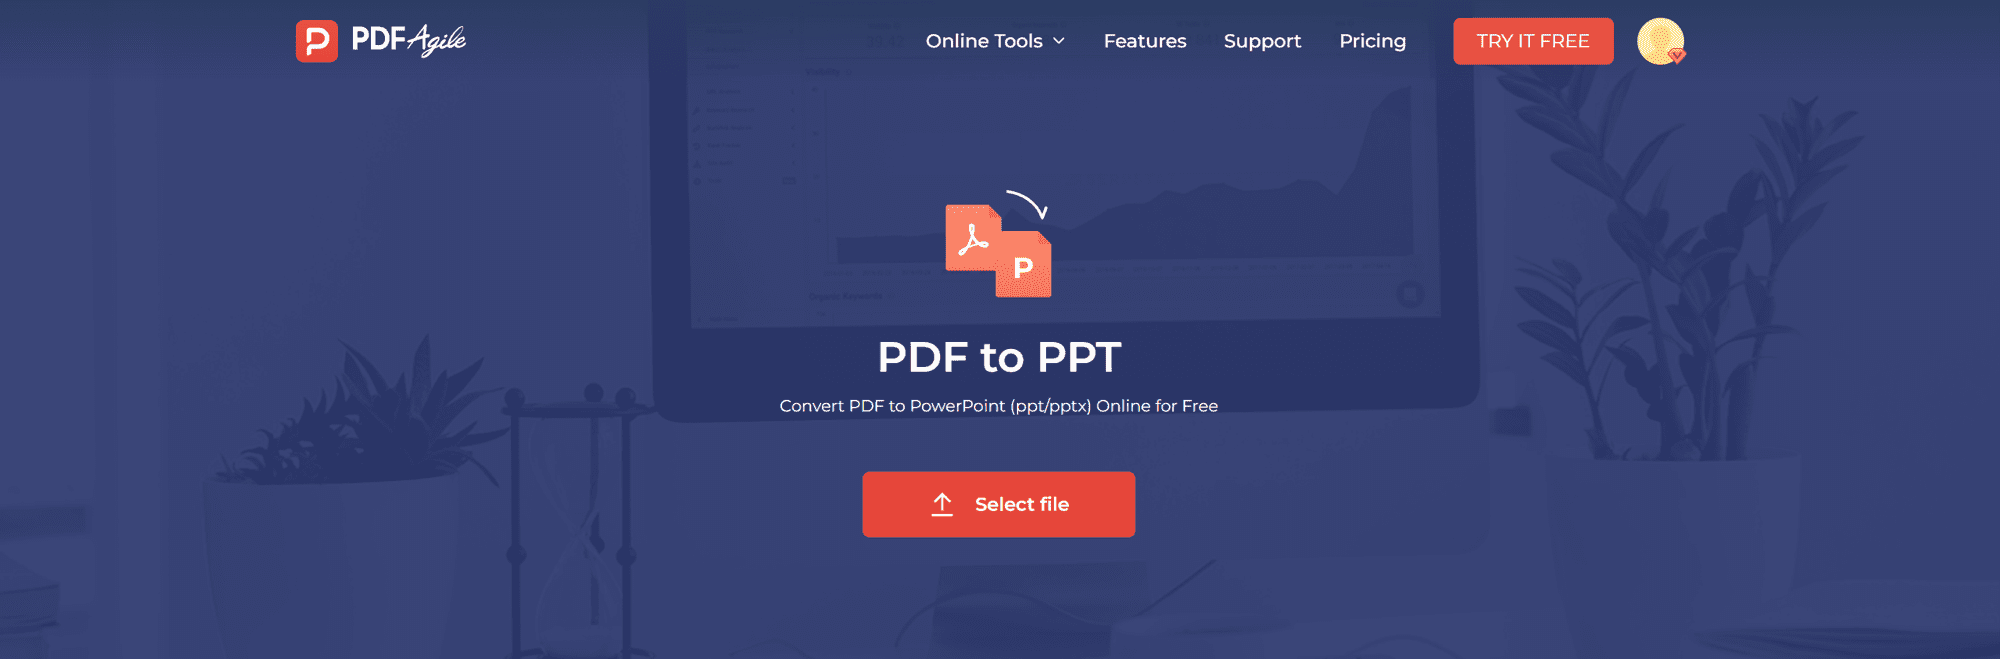 pdf-to-ppt.png